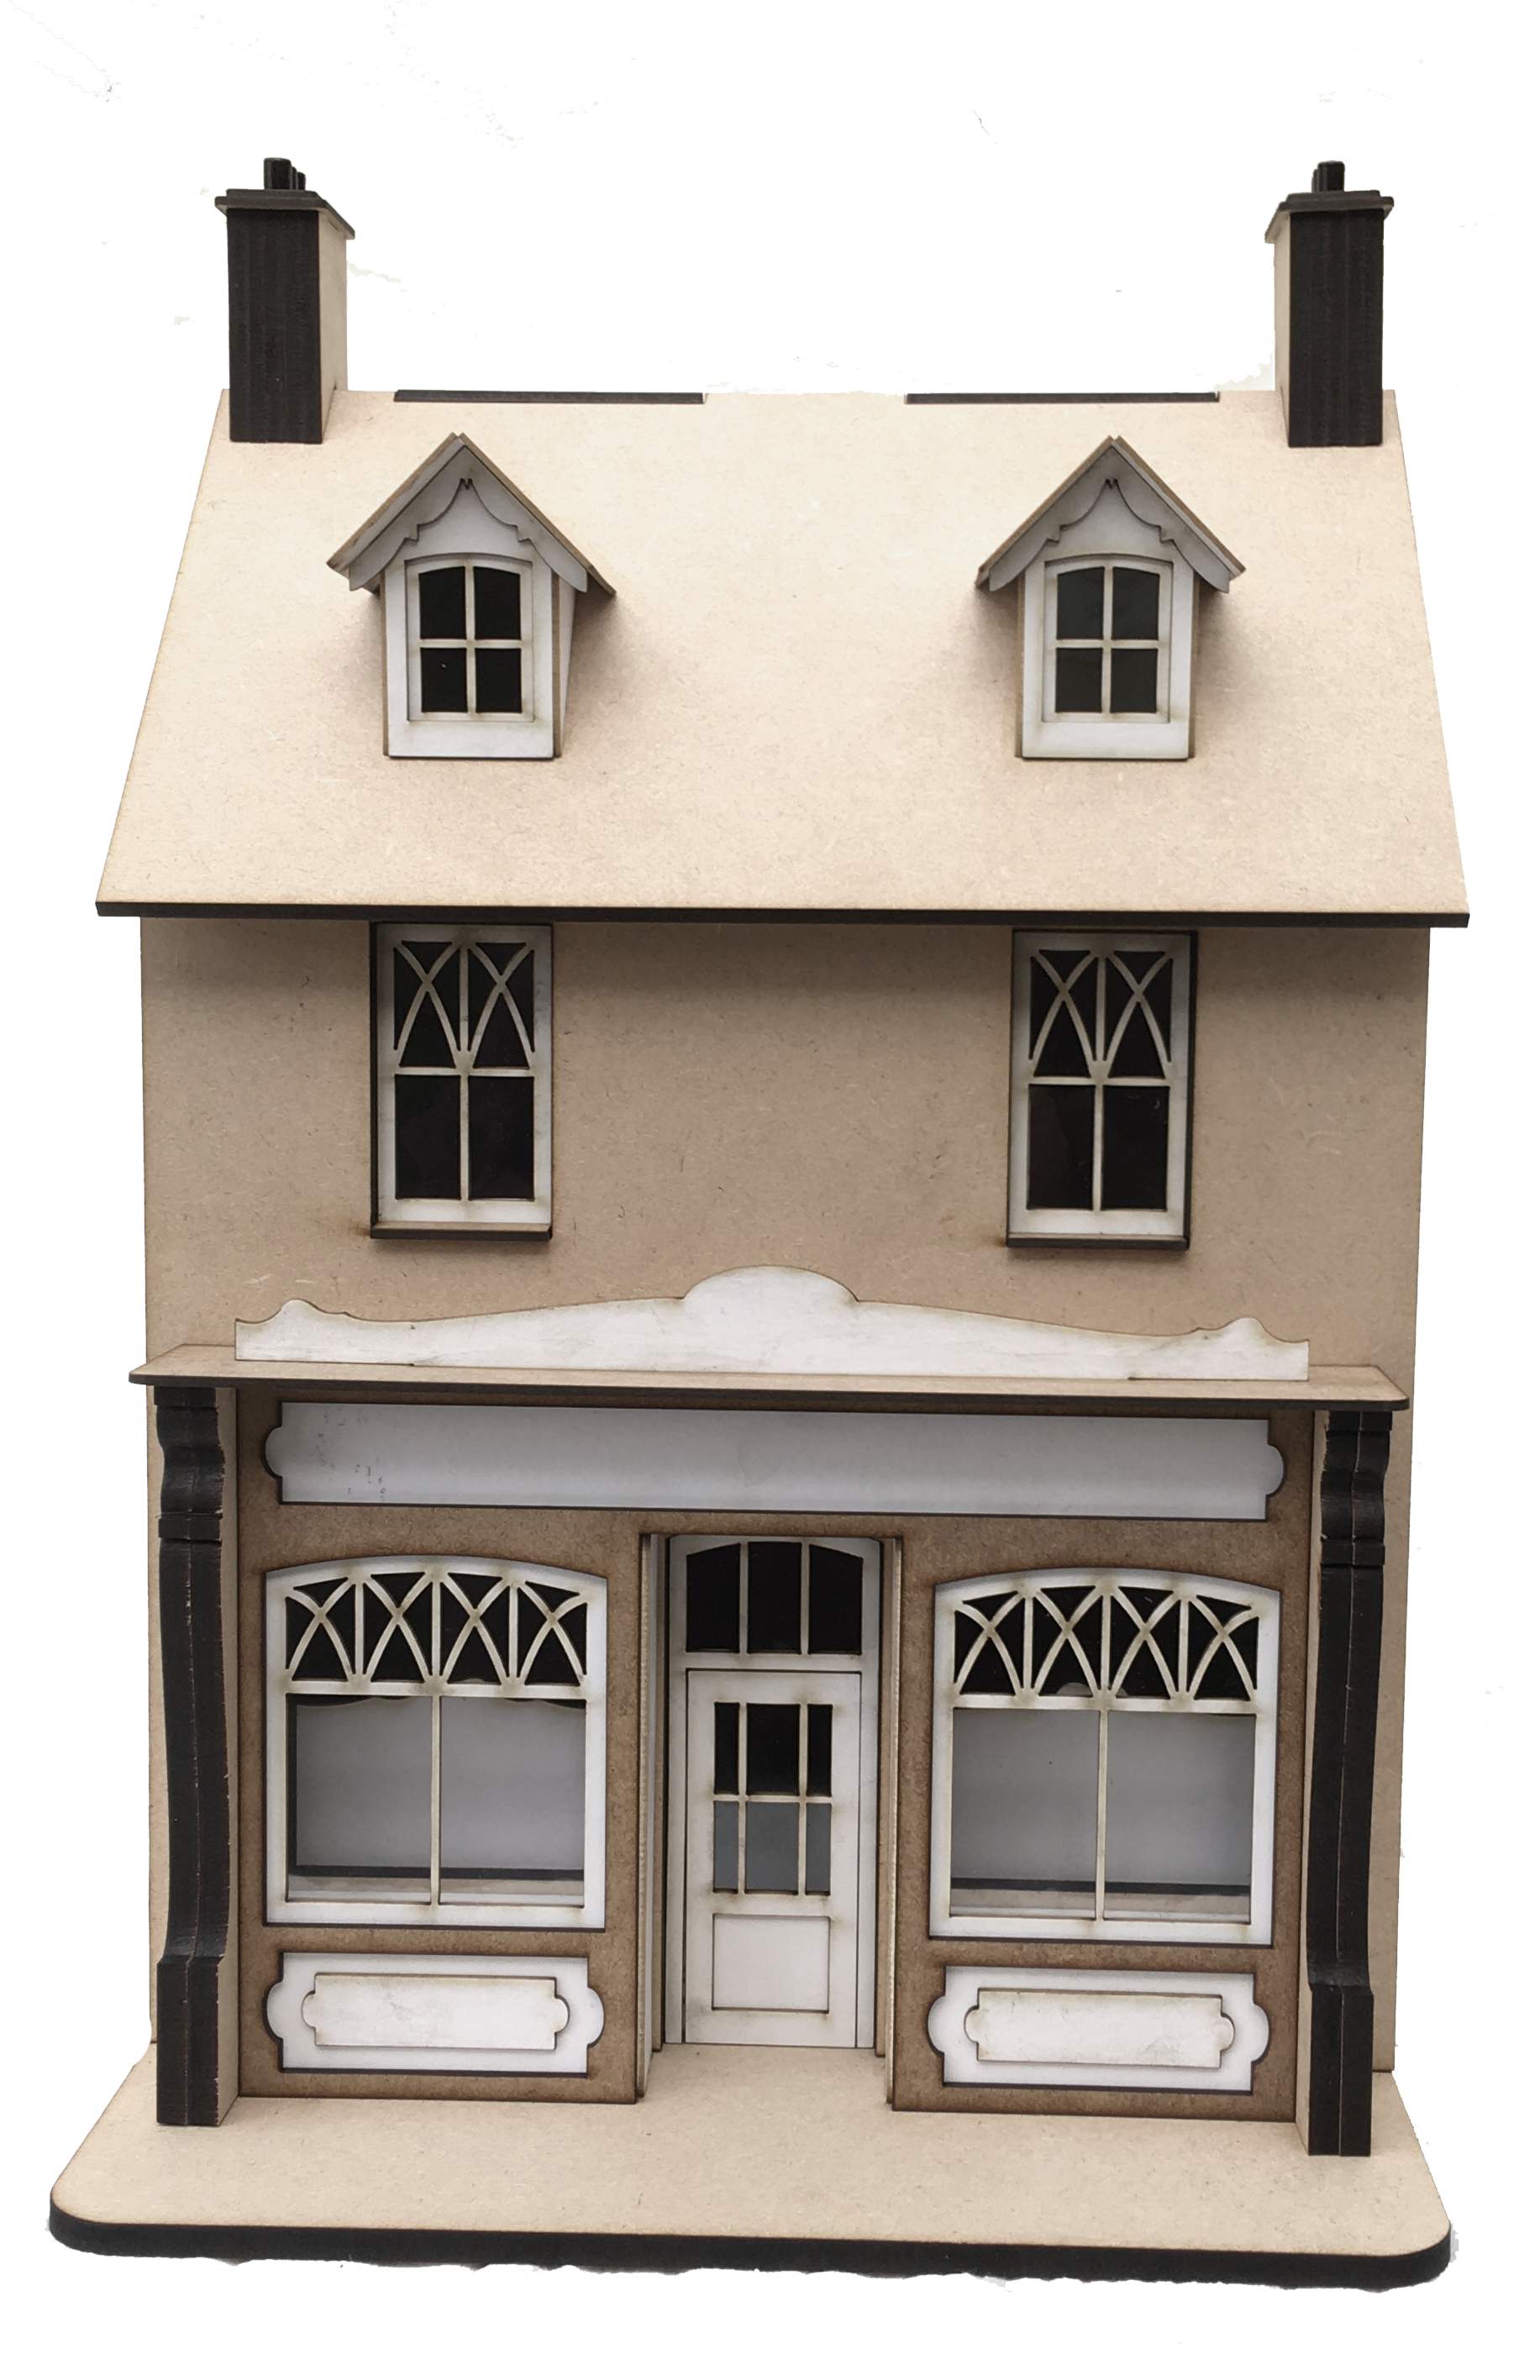 24th scale dolls house